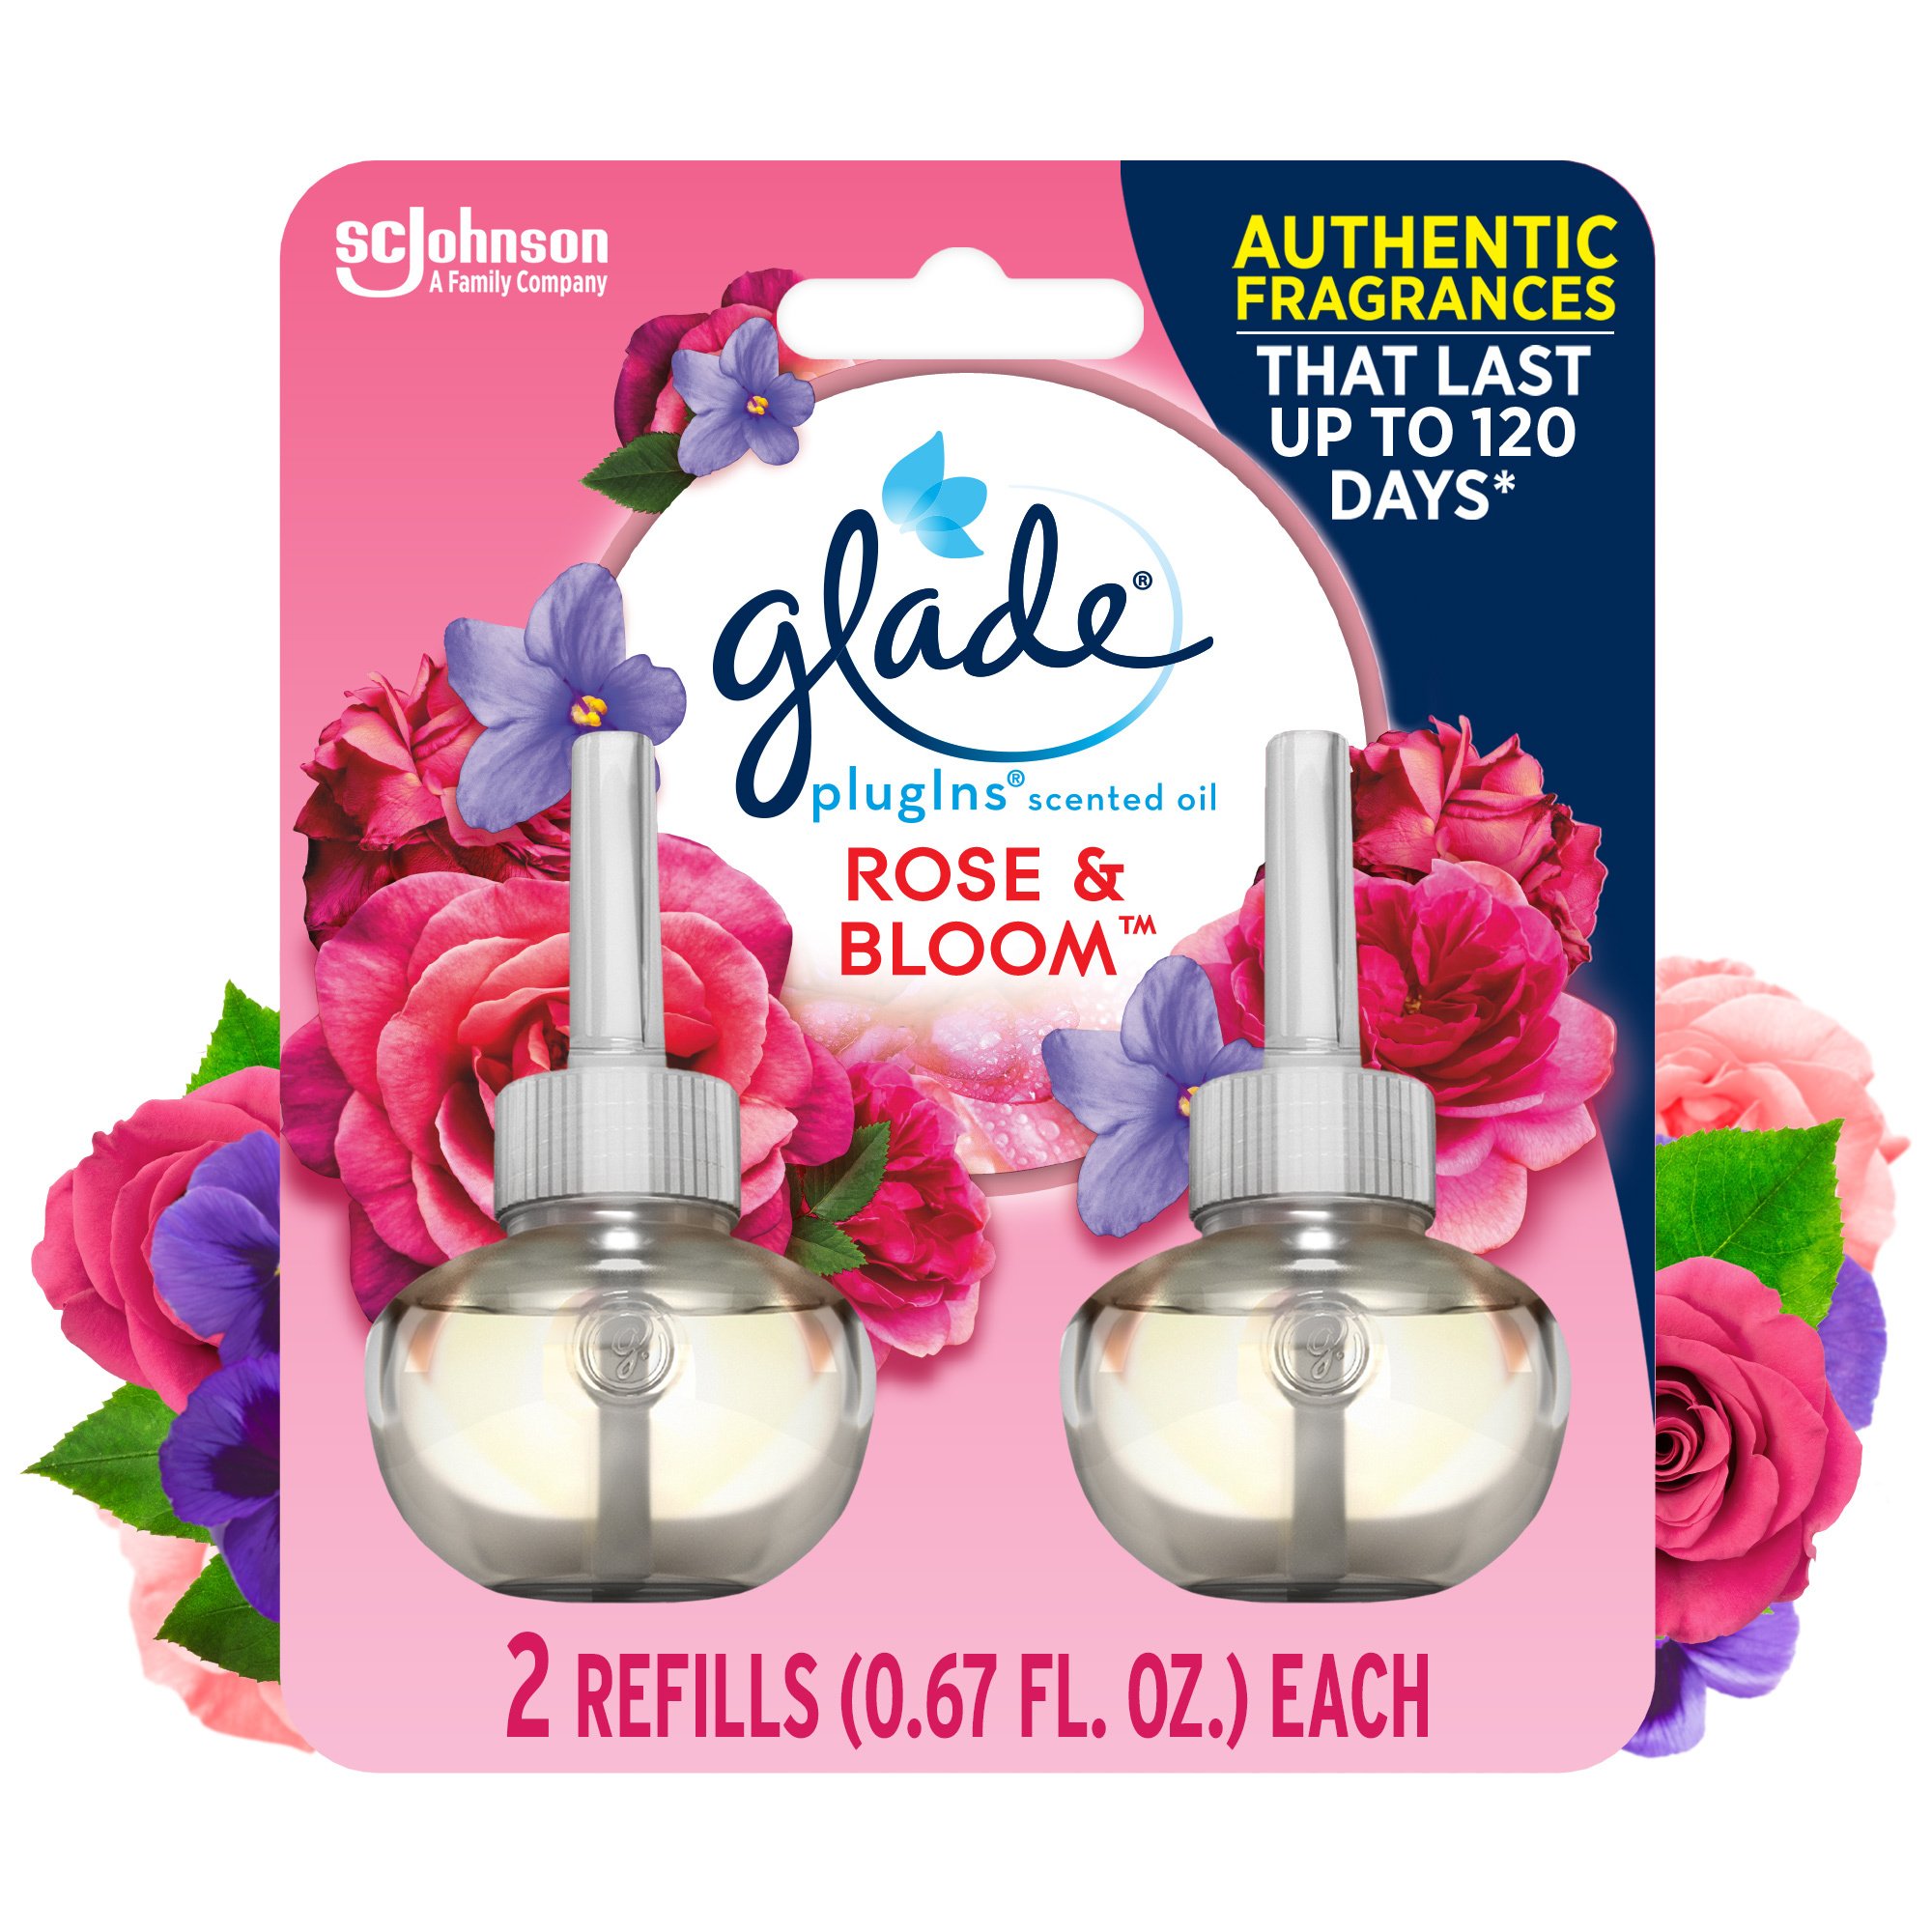 Glade PlugIns Scented Oils Warmer Value Pack - Shop Air Fresheners at H-E-B